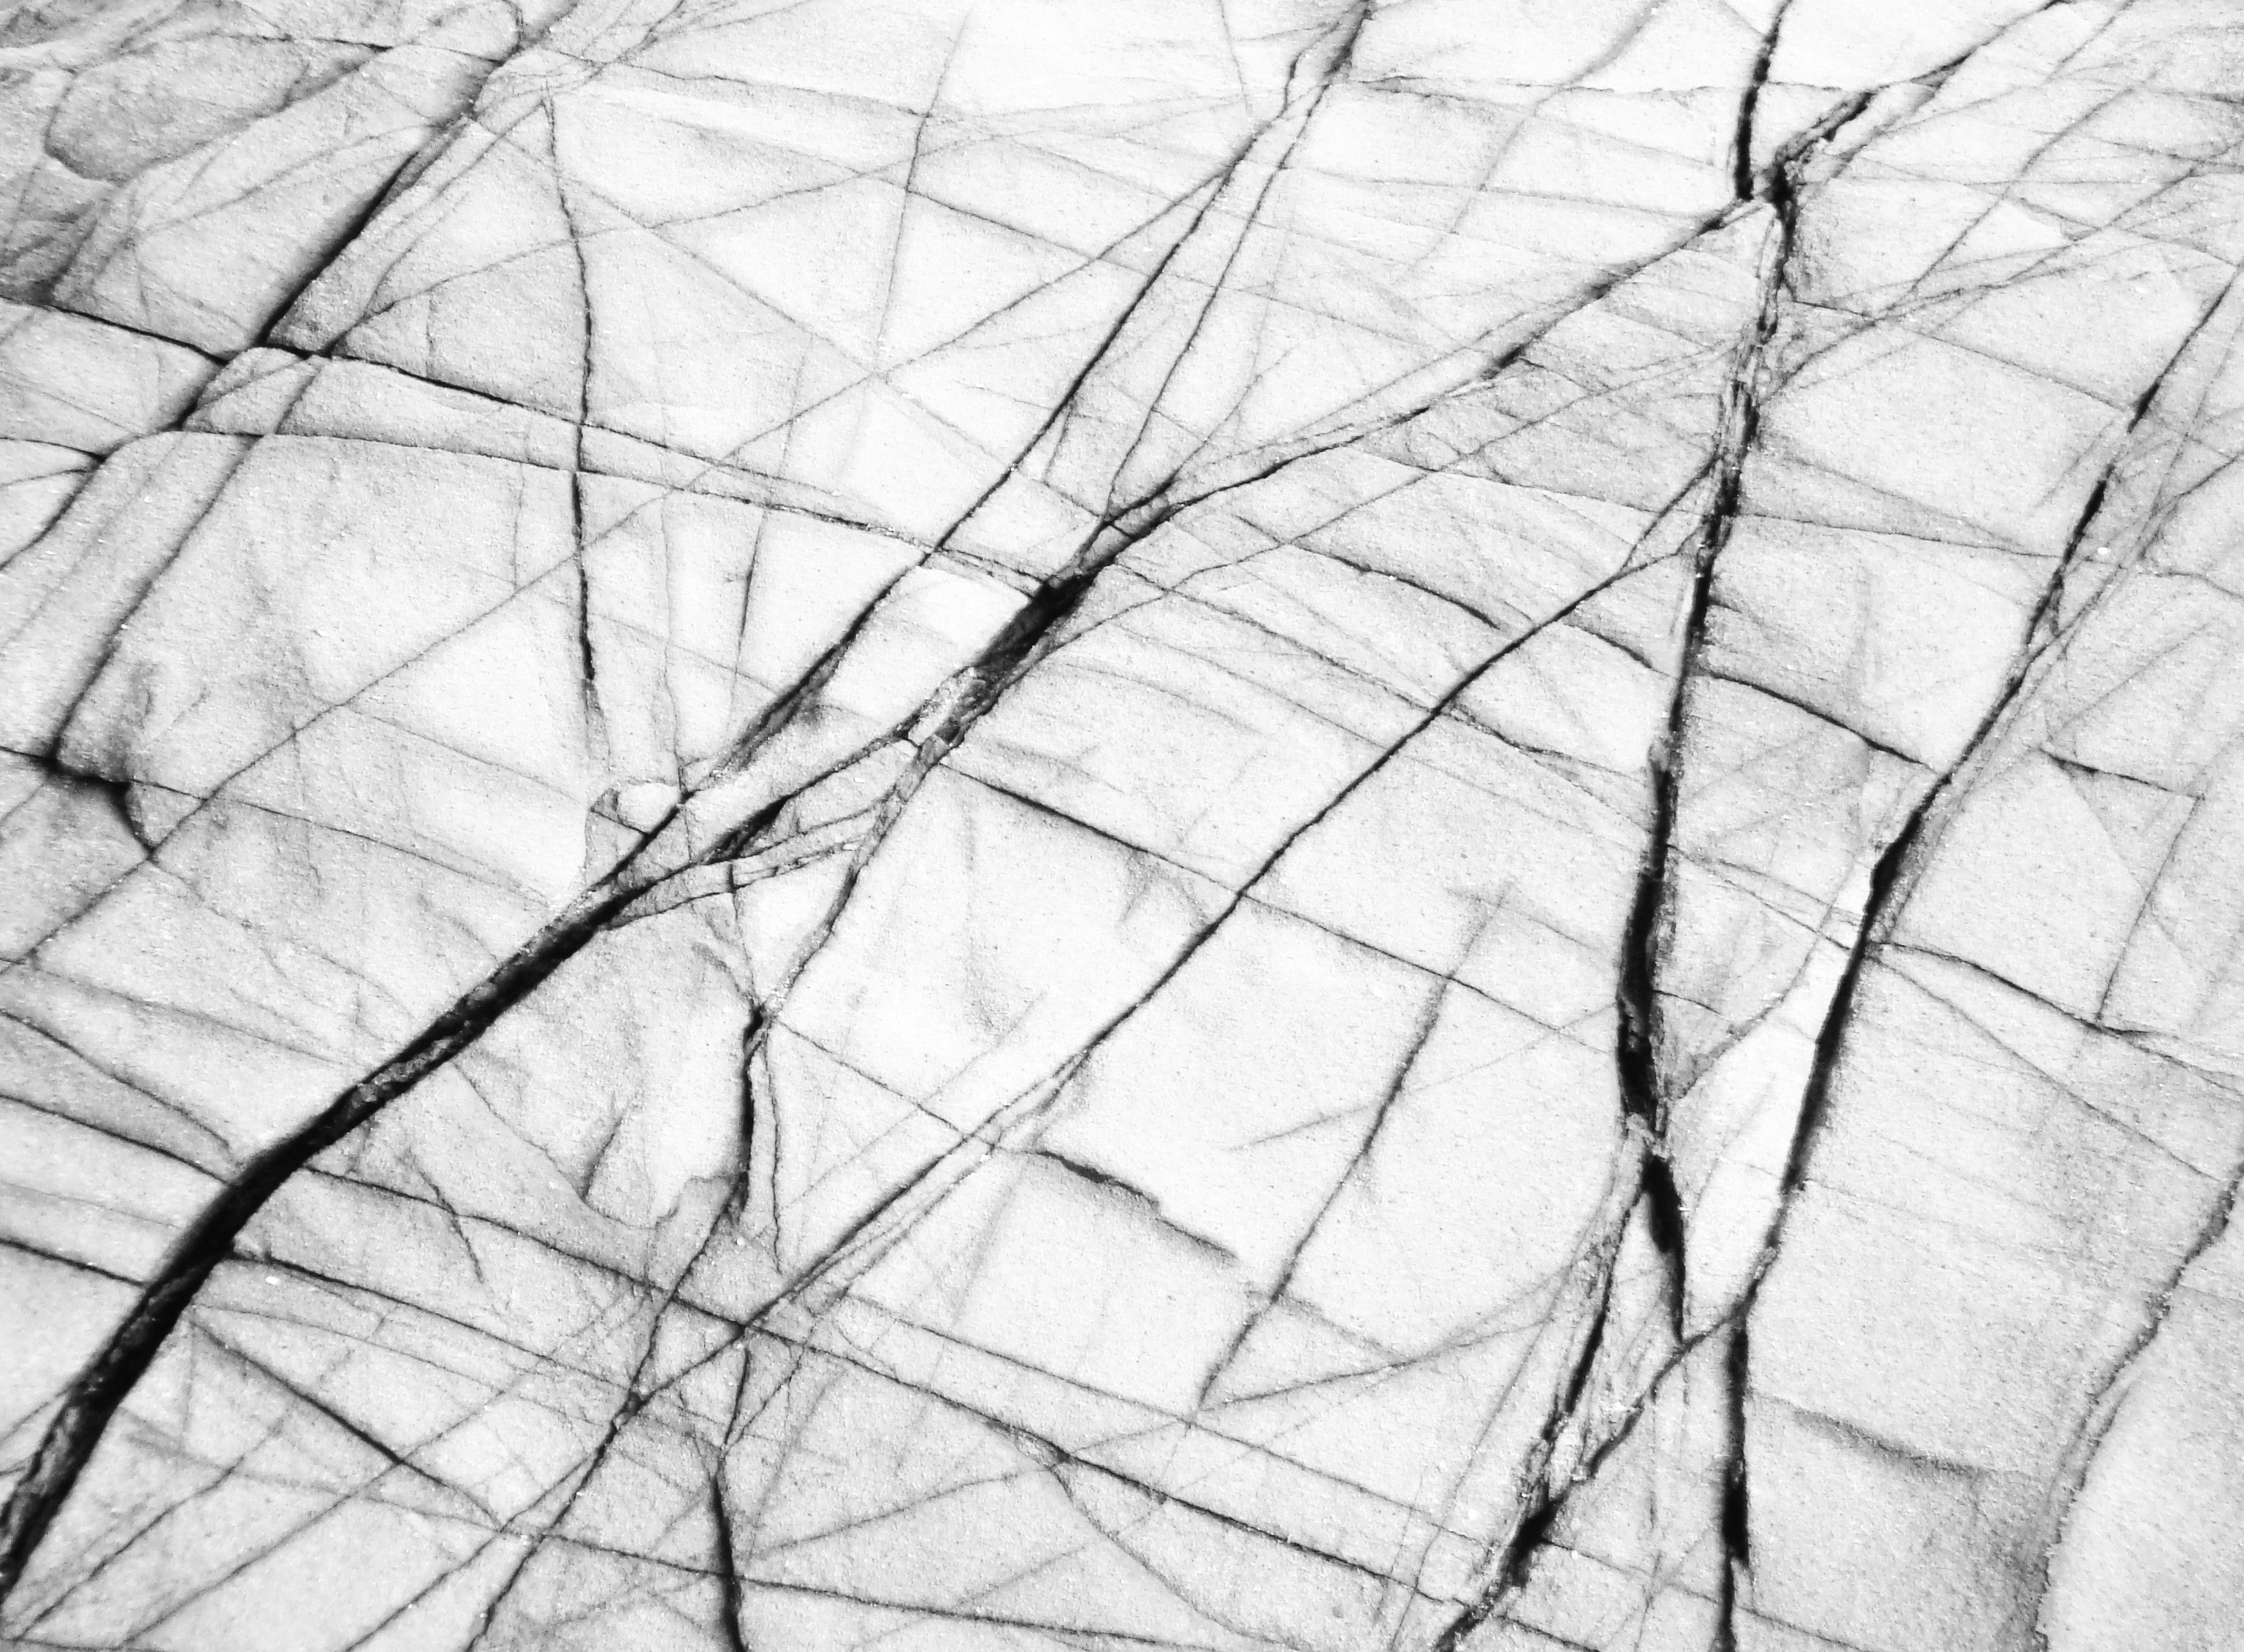 Cracked Rock Background, Abstract, Natural, Weathered, Texture, HQ Photo